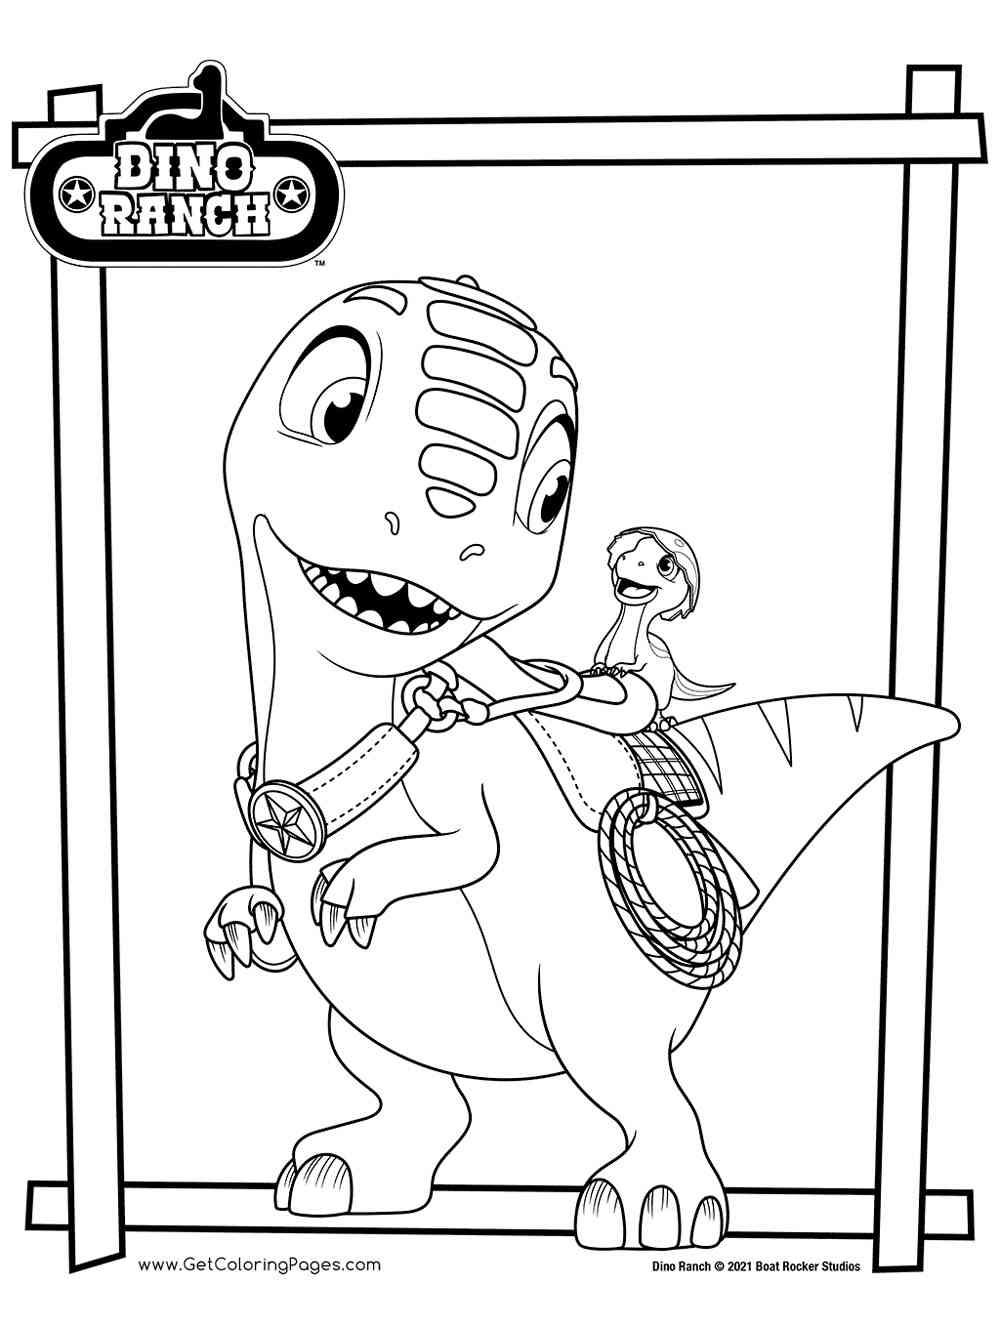 Dino Ranch 13 coloring page